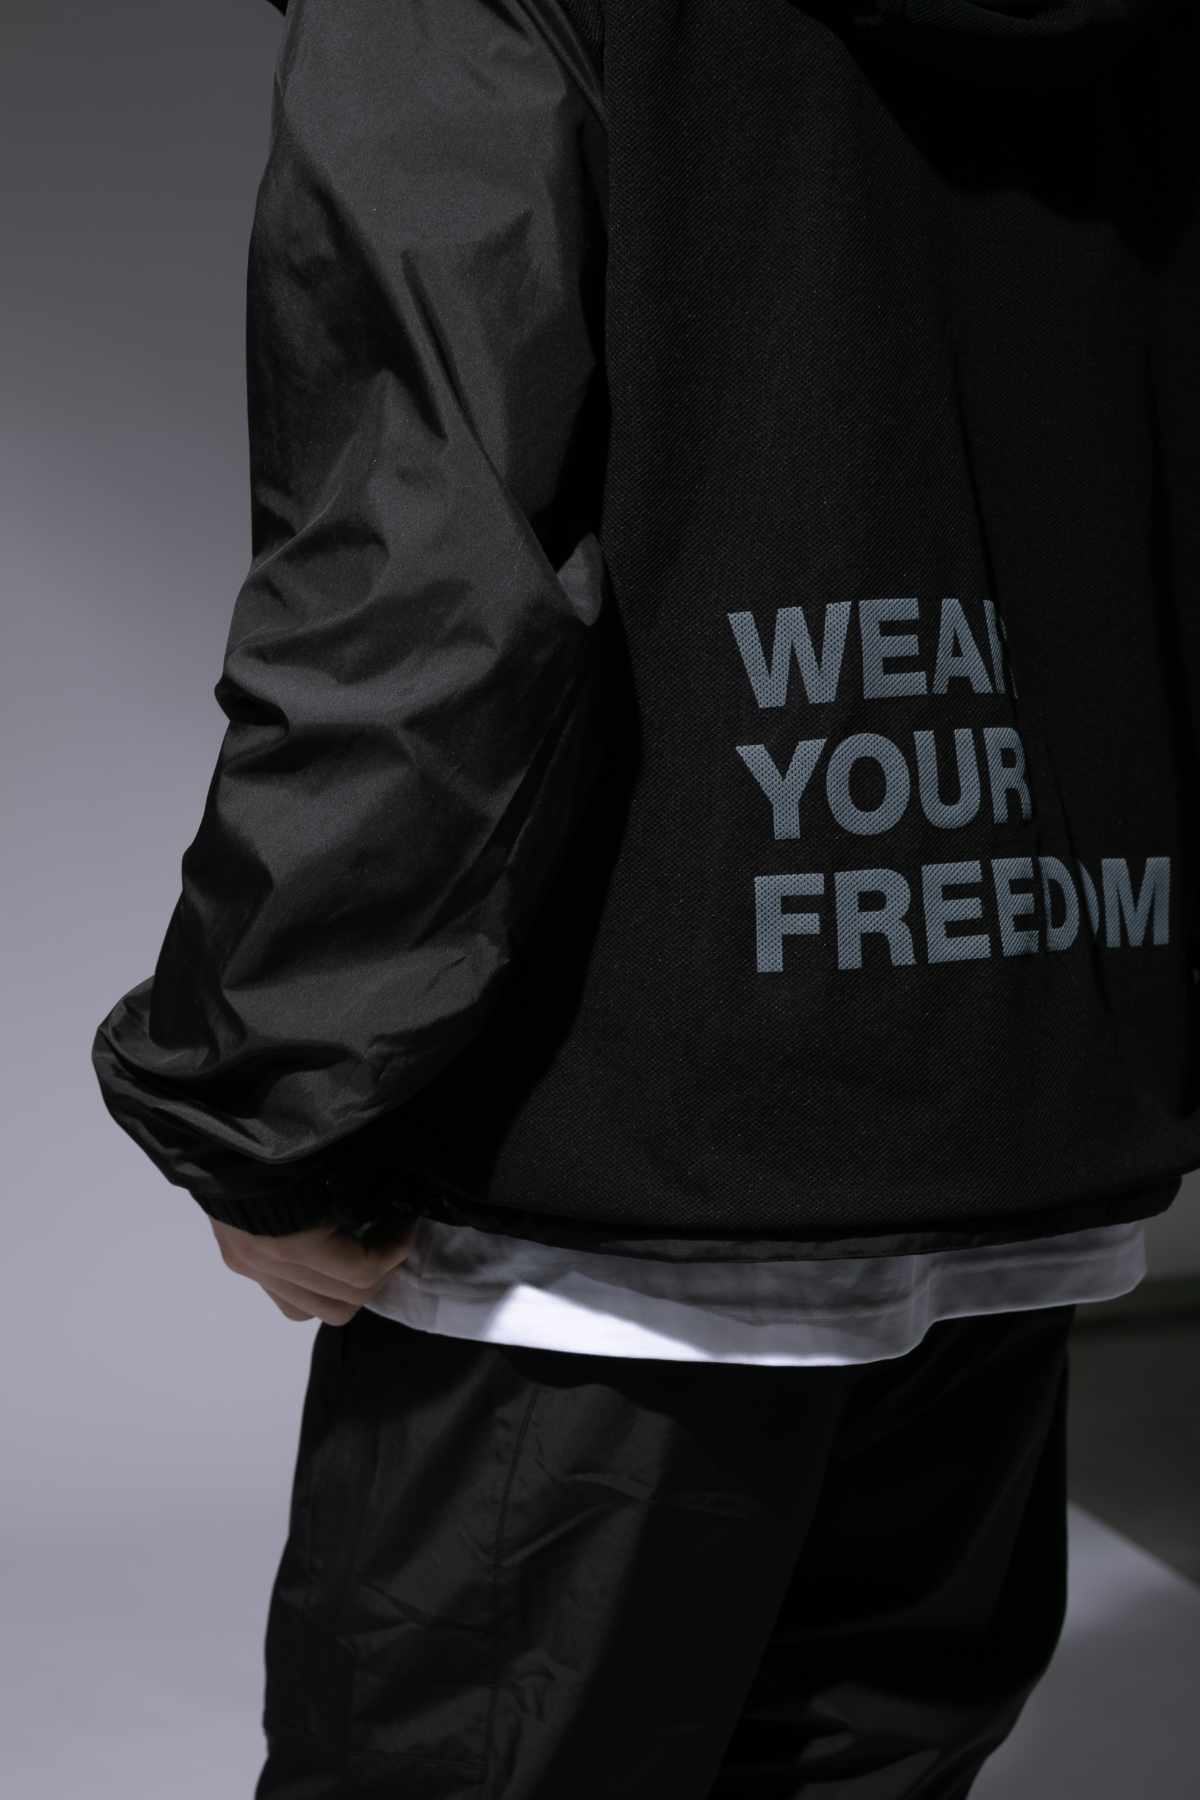 A male model wears the CDG x The North Face collaborative hooded zip-up jacket with "WEAR YOUR FREEDOM" text